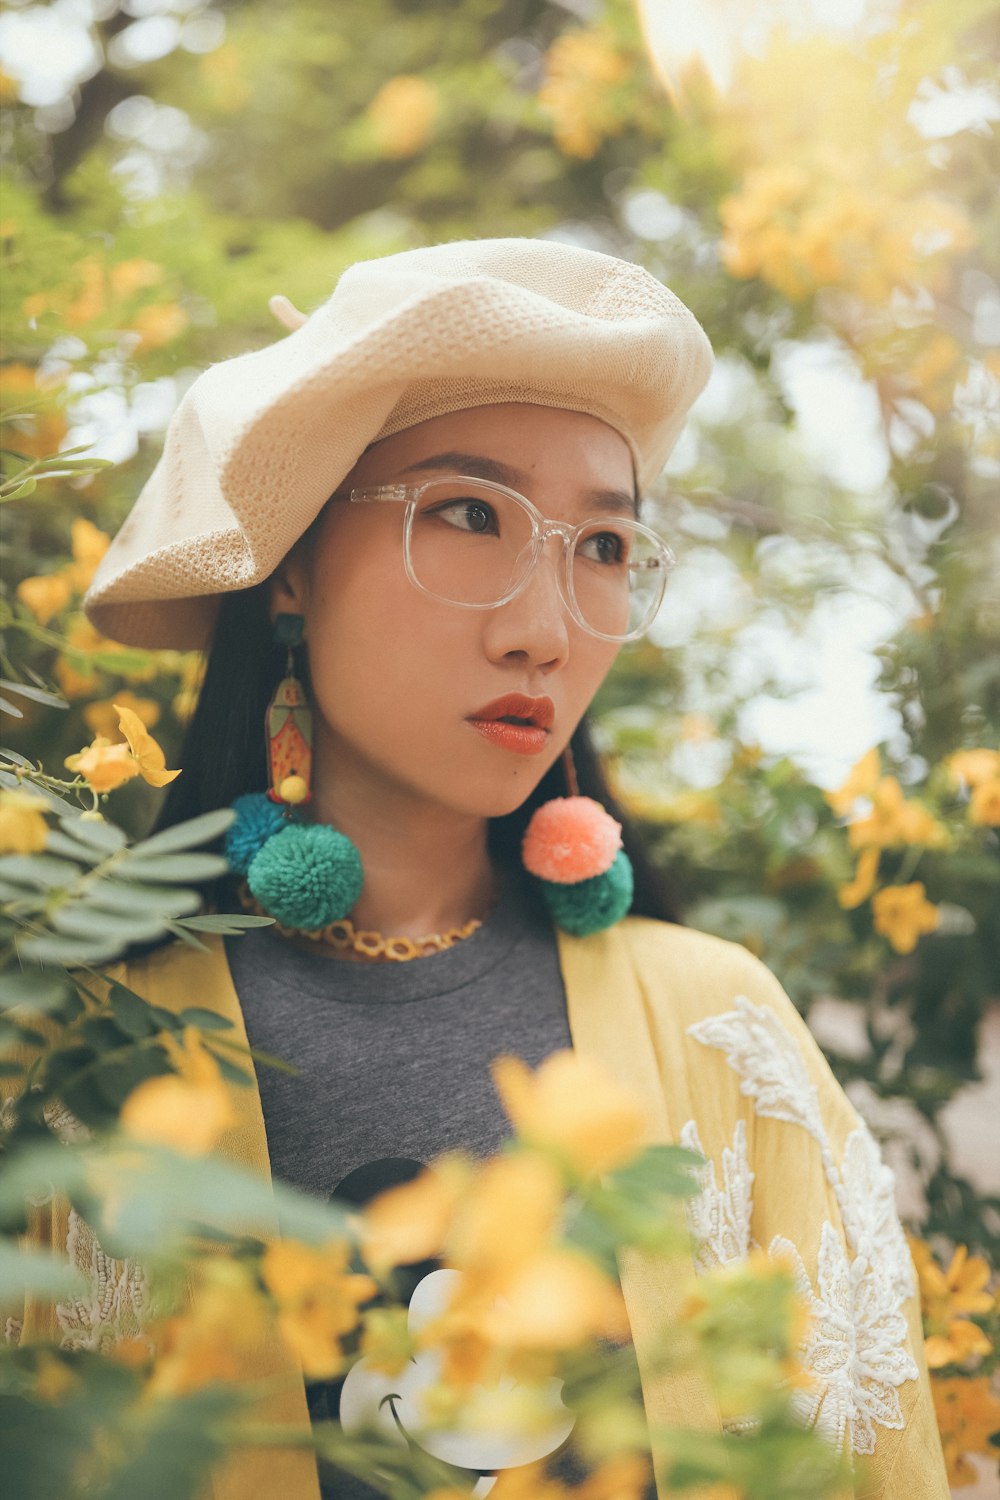 selective focus photography of woman looking left while surrounded by yellow petaled flowers